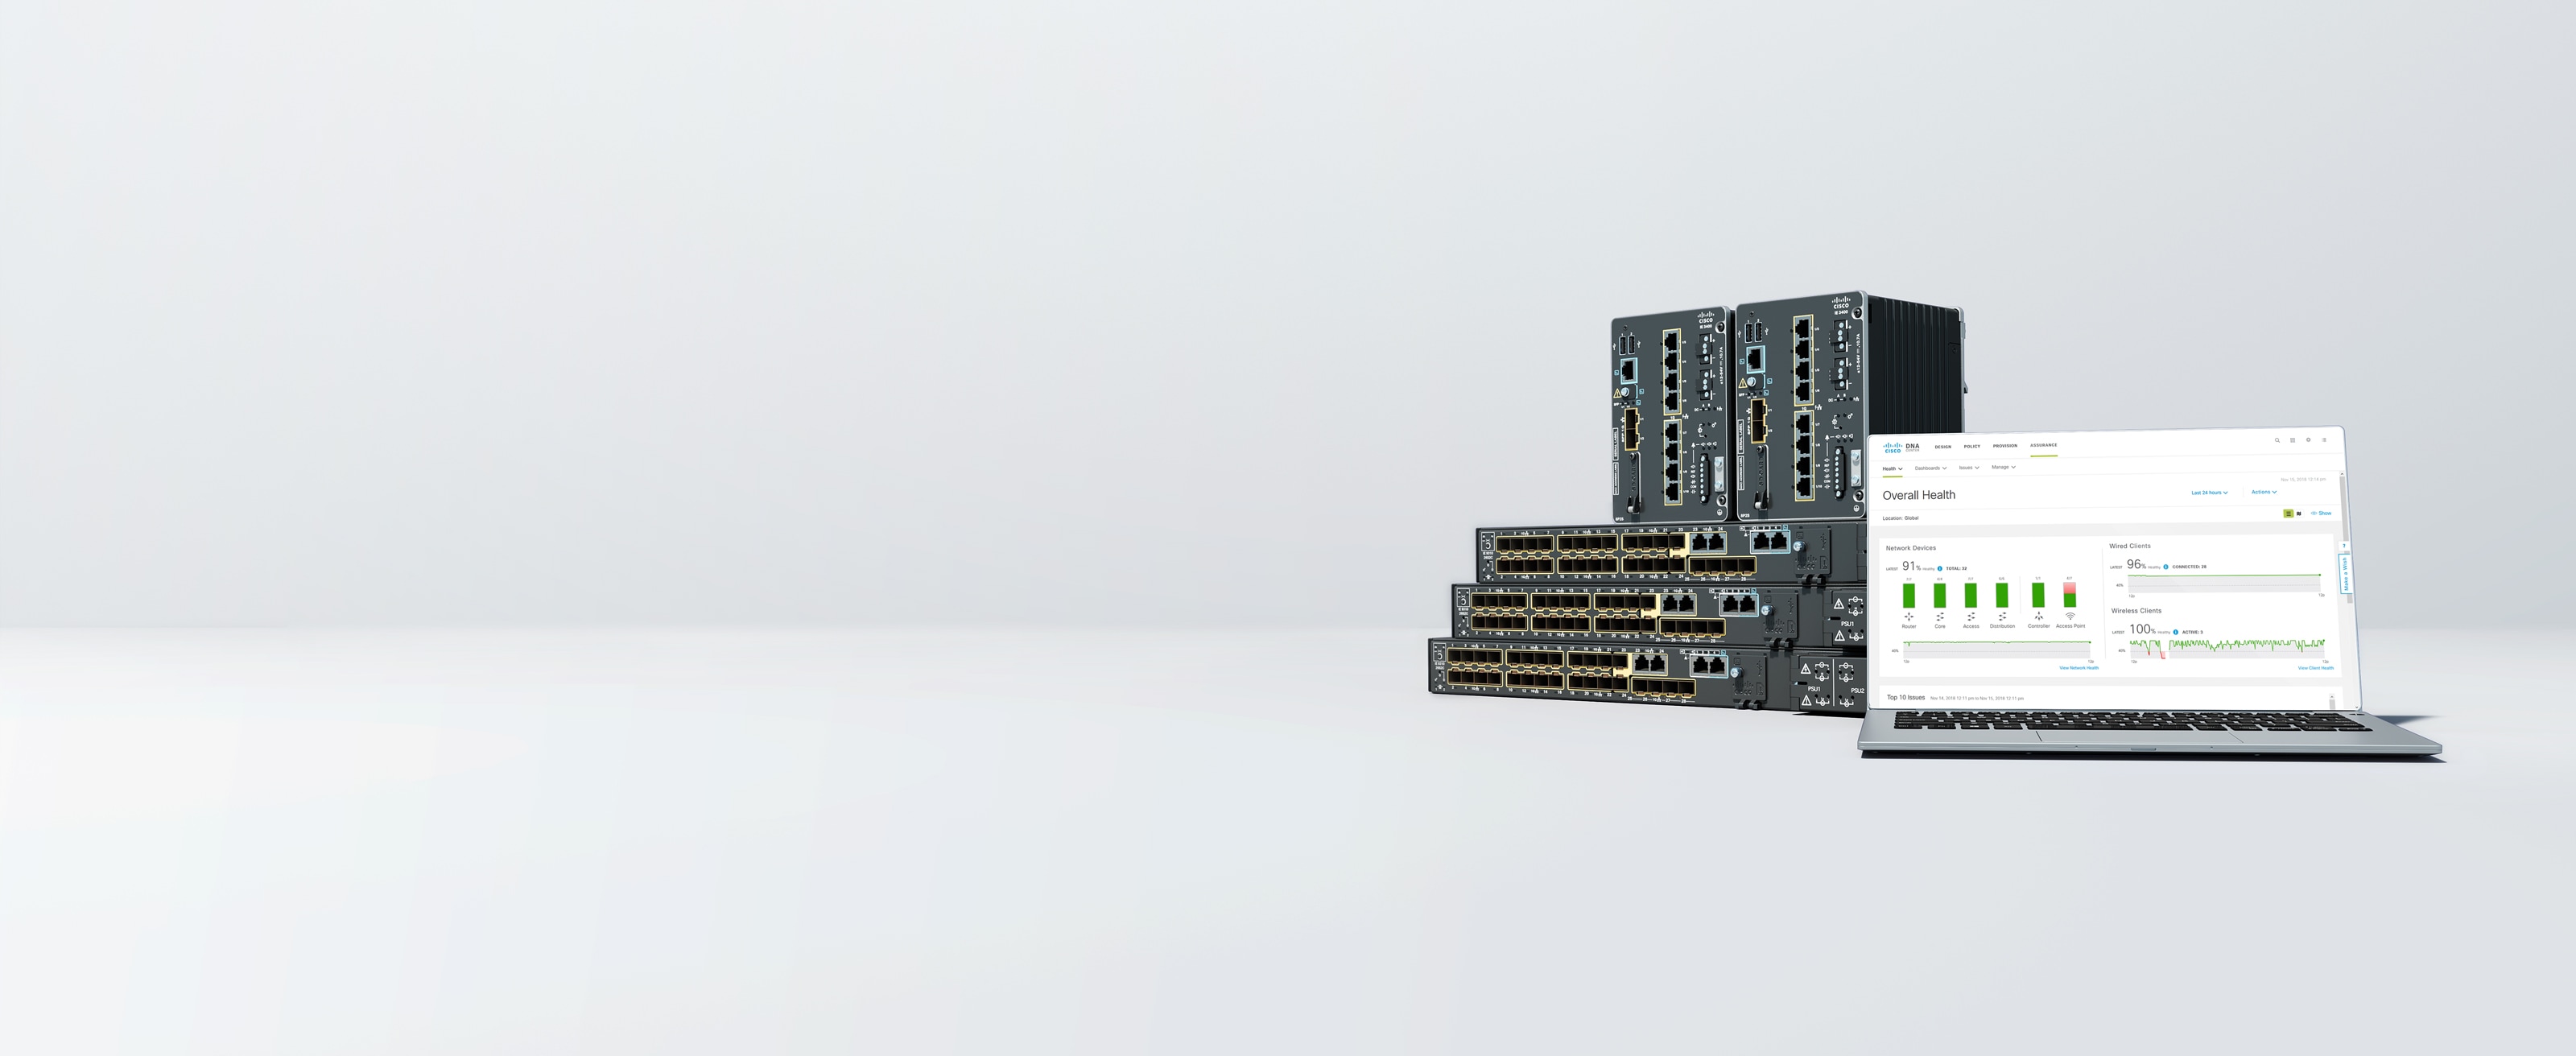 Cisco Industrial Ethernet switches